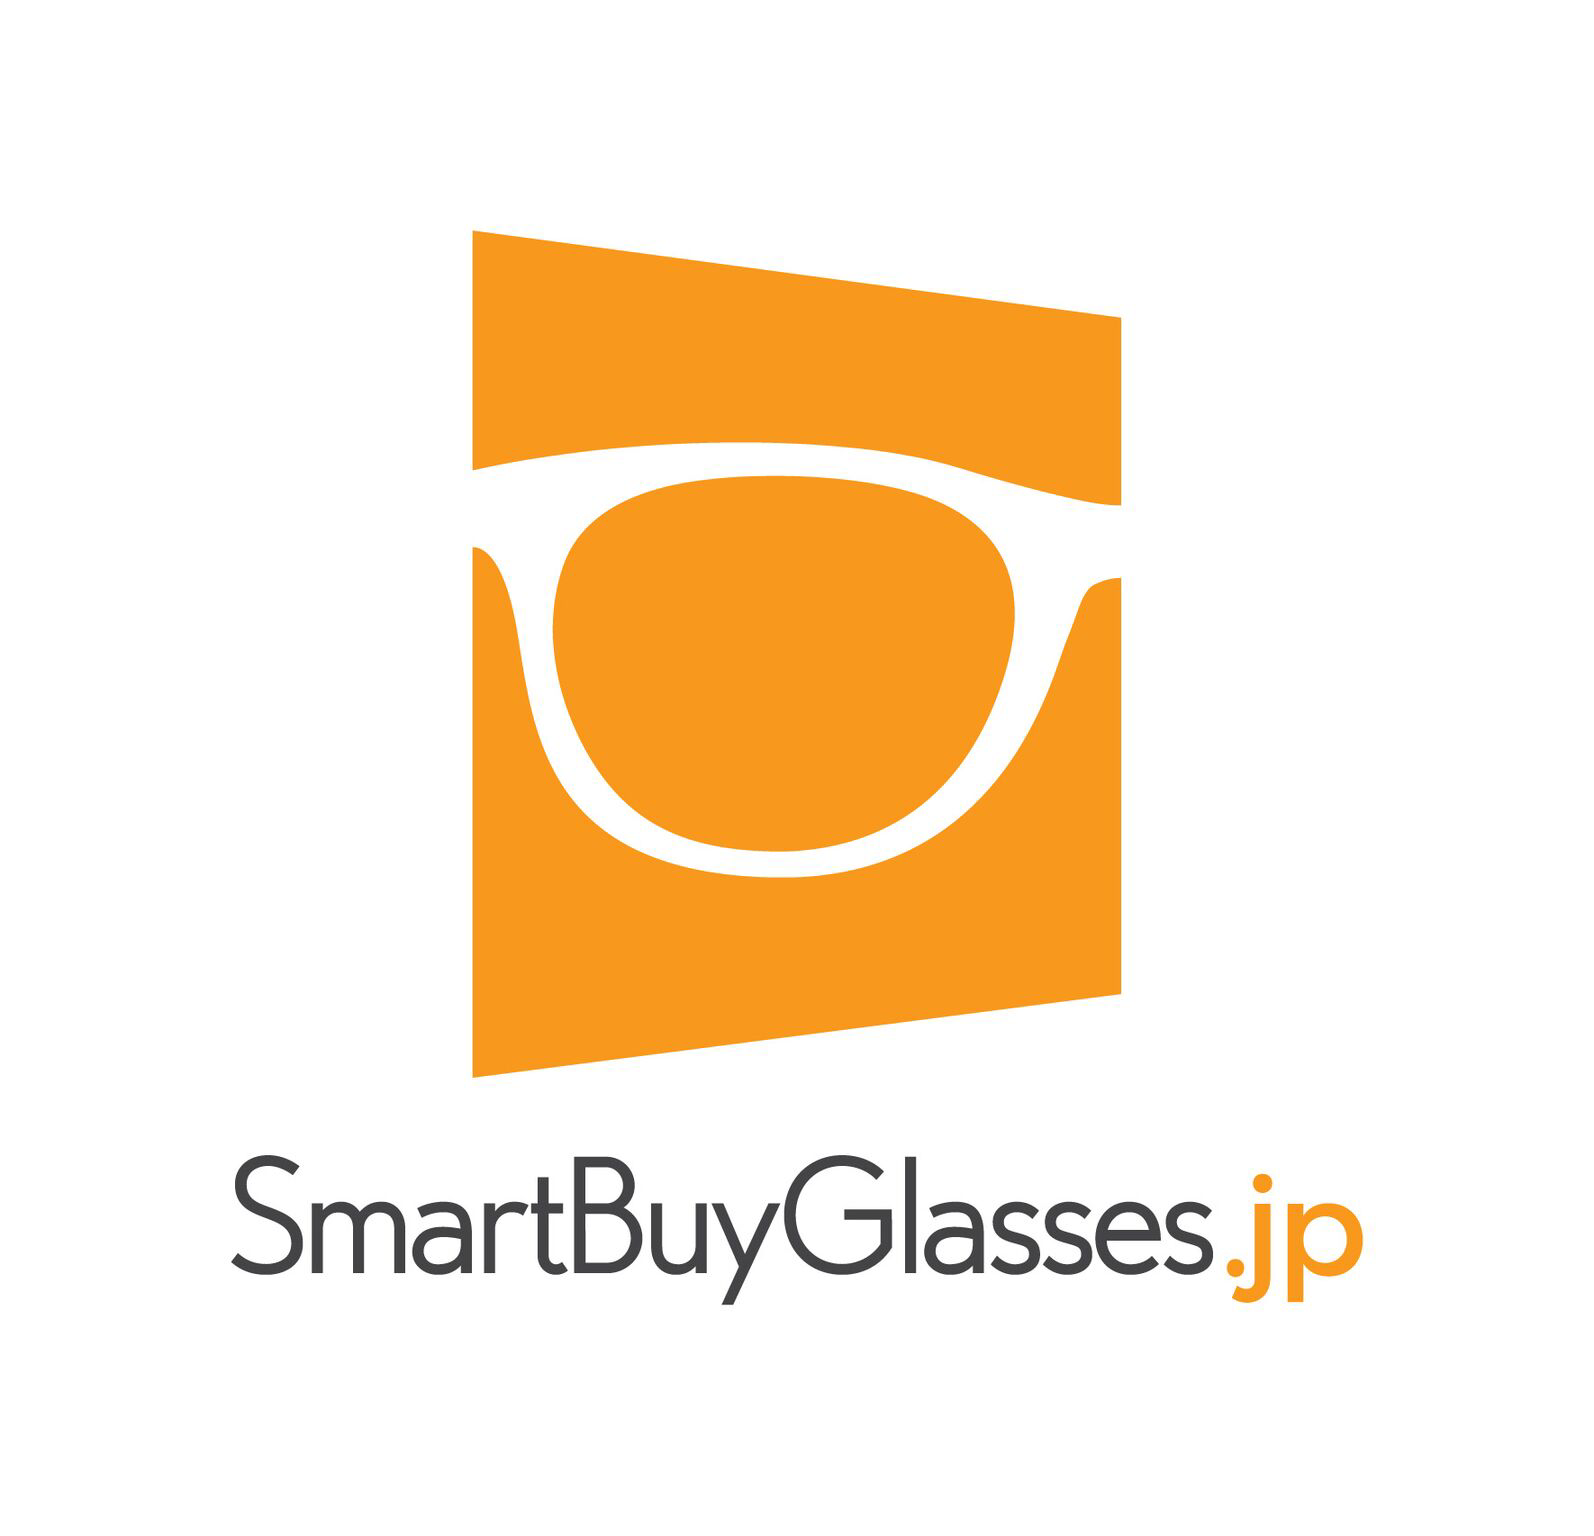 SmartBuyGlasses Coupons & Promo Codes